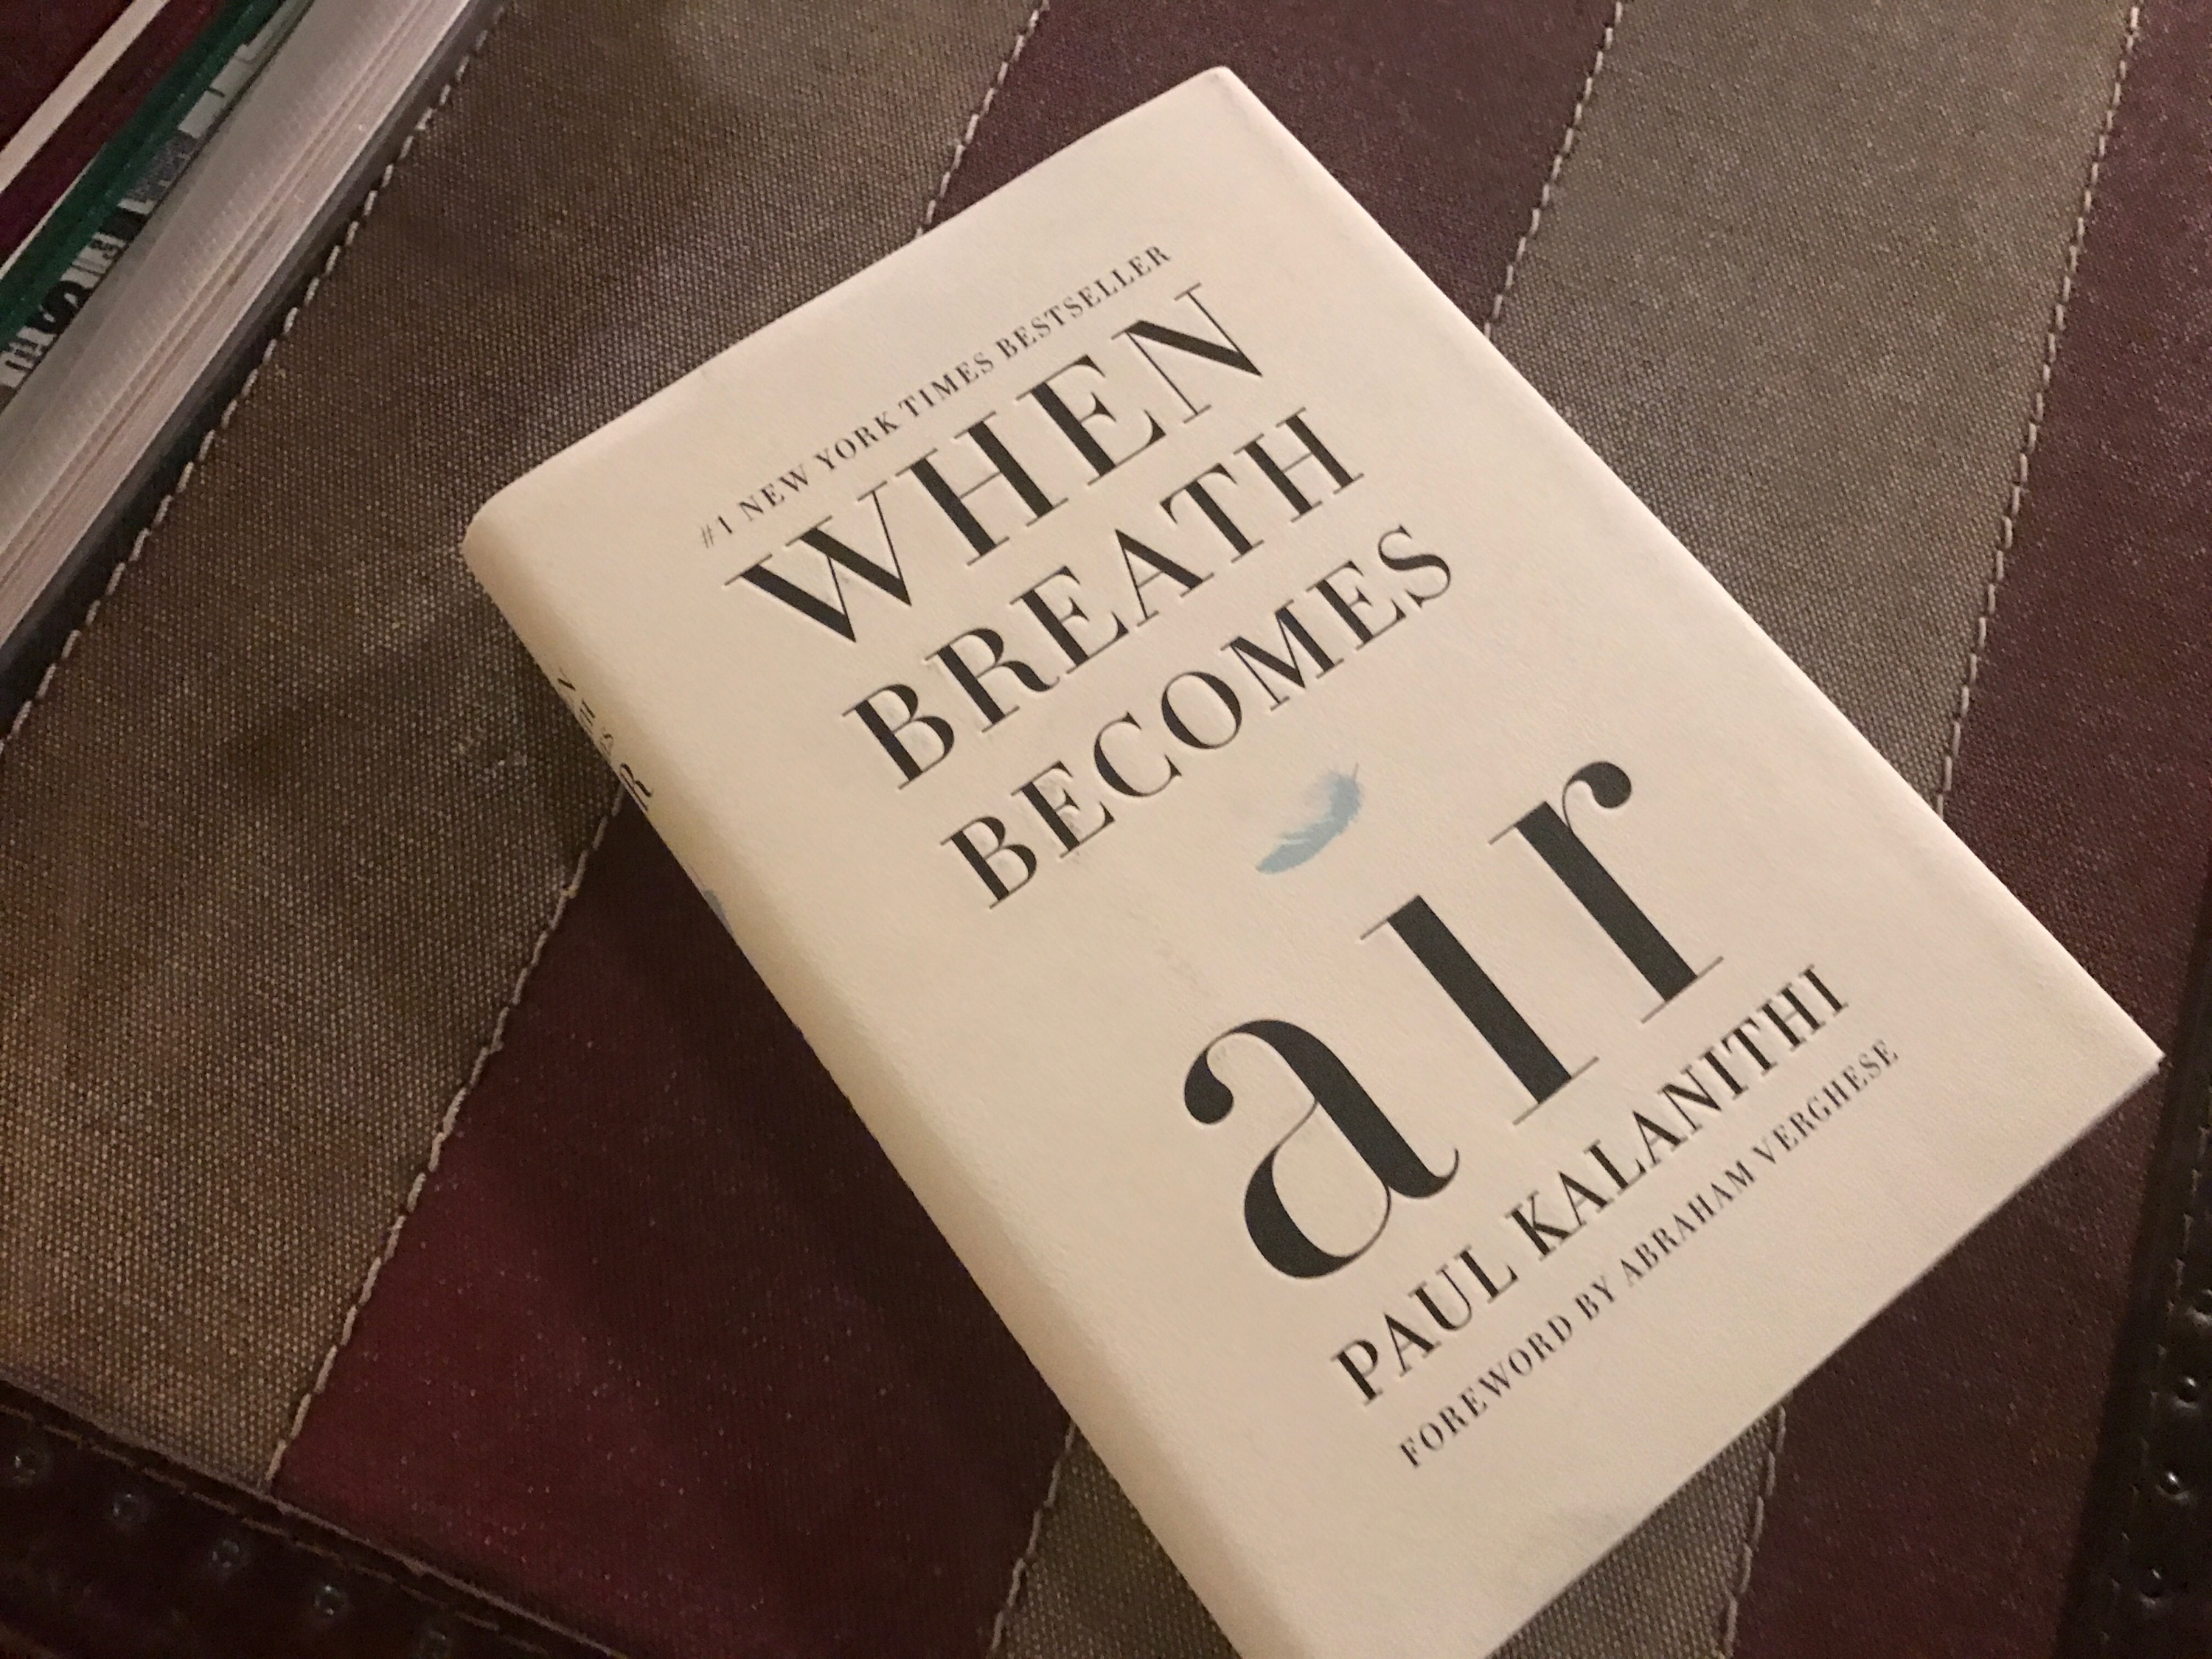 A Review of “When Breath Becomes Air” From Someone Living With Lung Disease